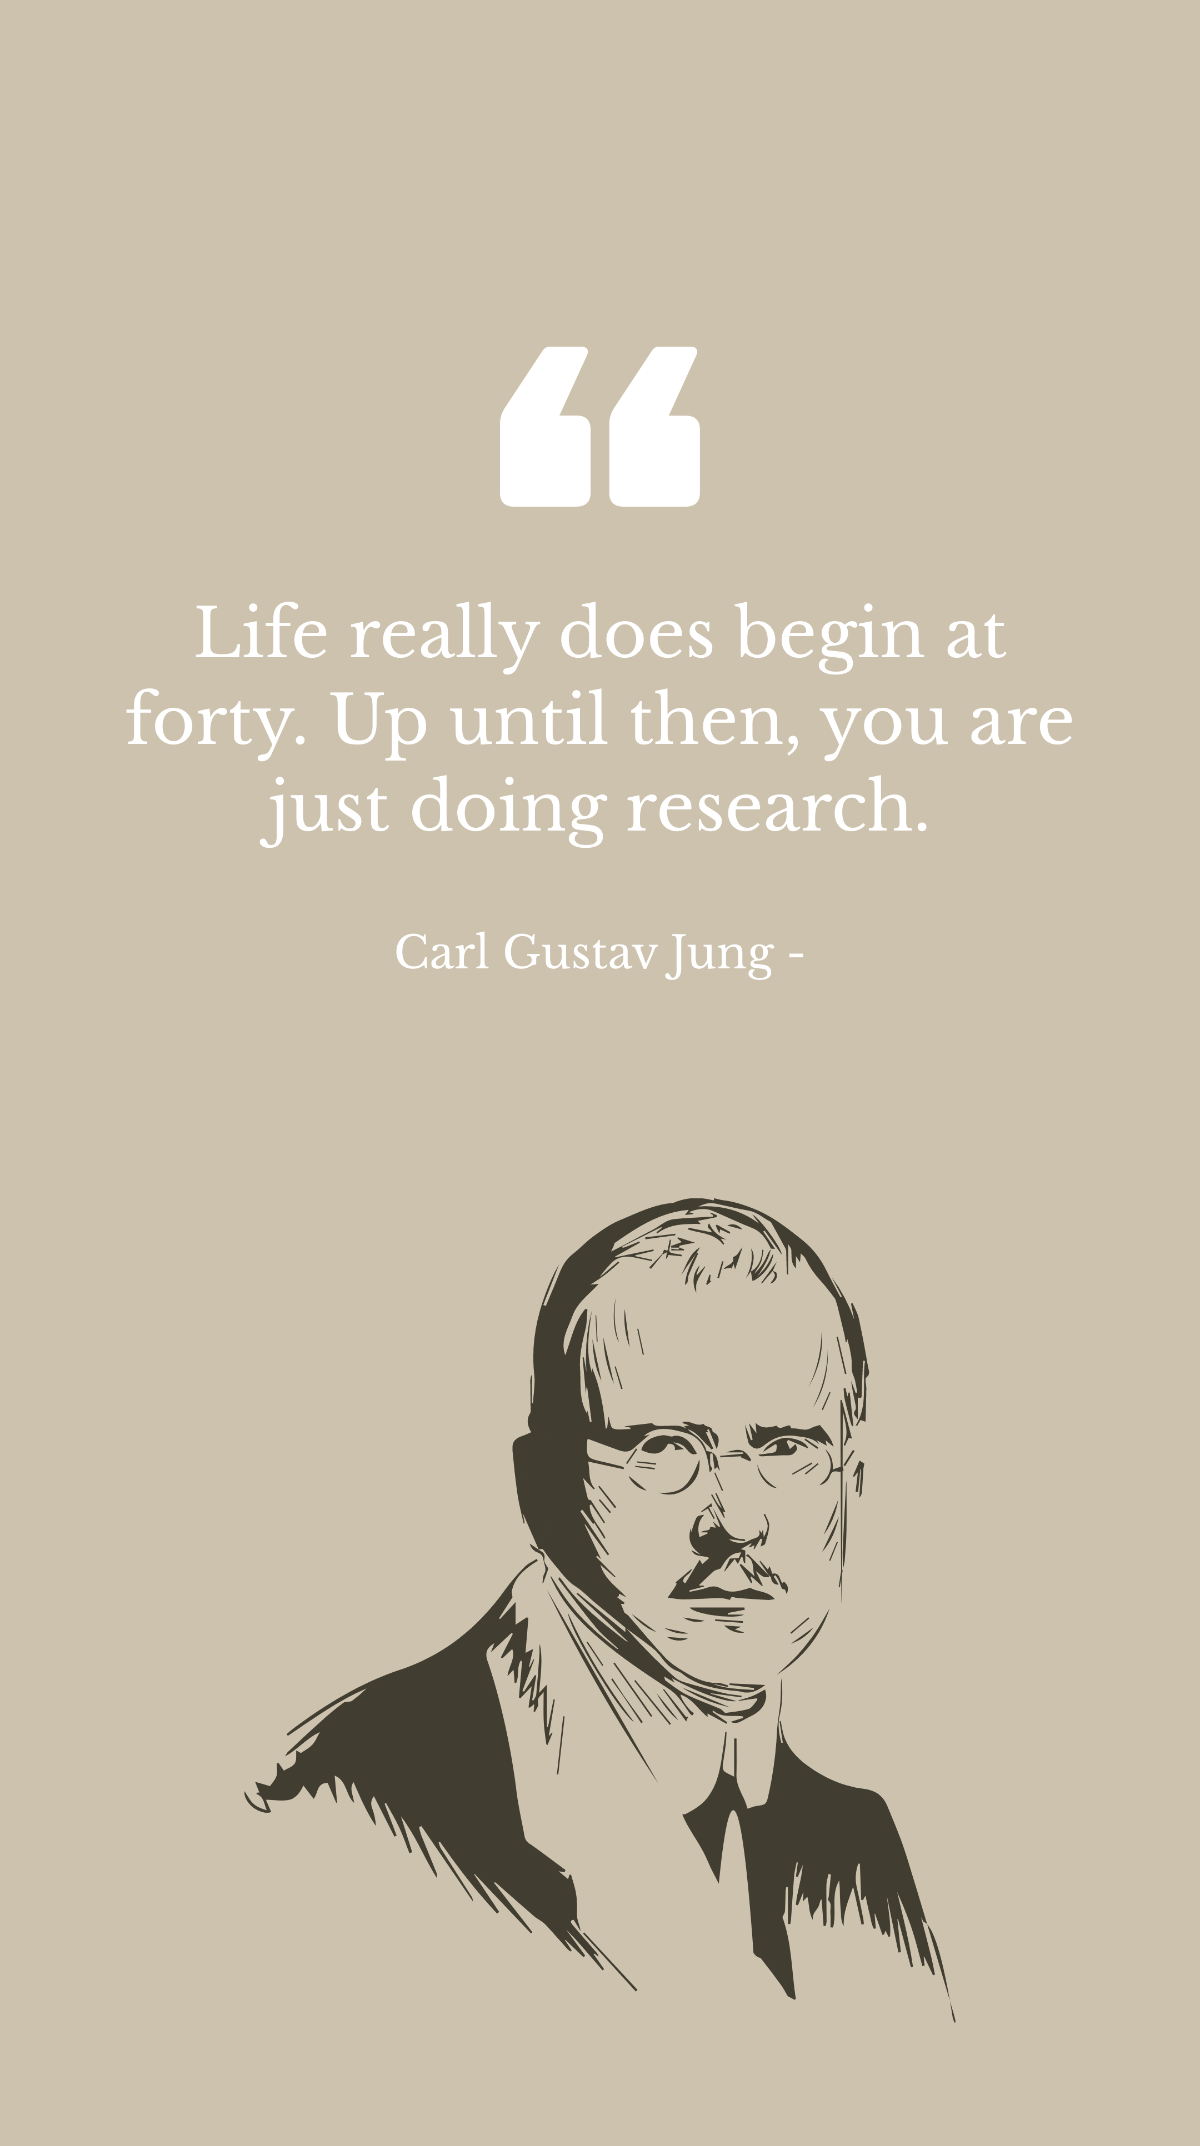 Carl Gustav Jung - Life really does begin at forty. Up until then, you are just doing research. Template